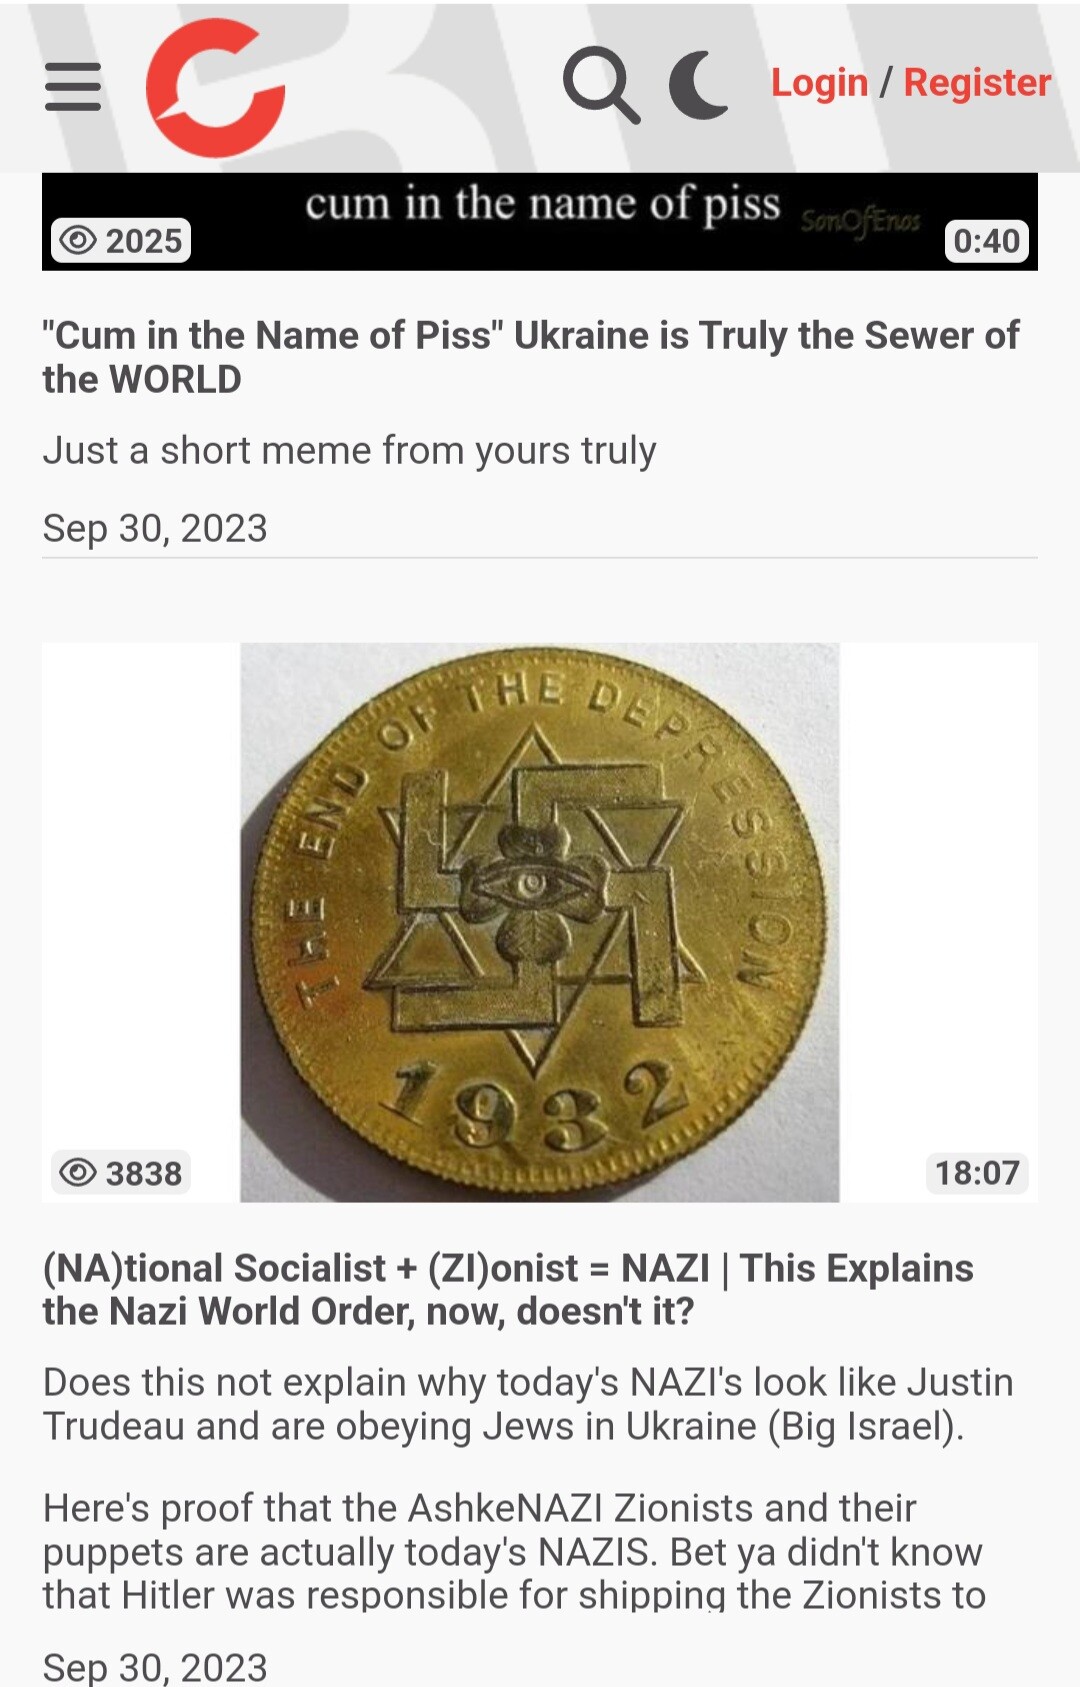 2022_03 The Hidden History of the Incredibly Evil Khazarian Mafia - Page 2 37a013dae88dbea0